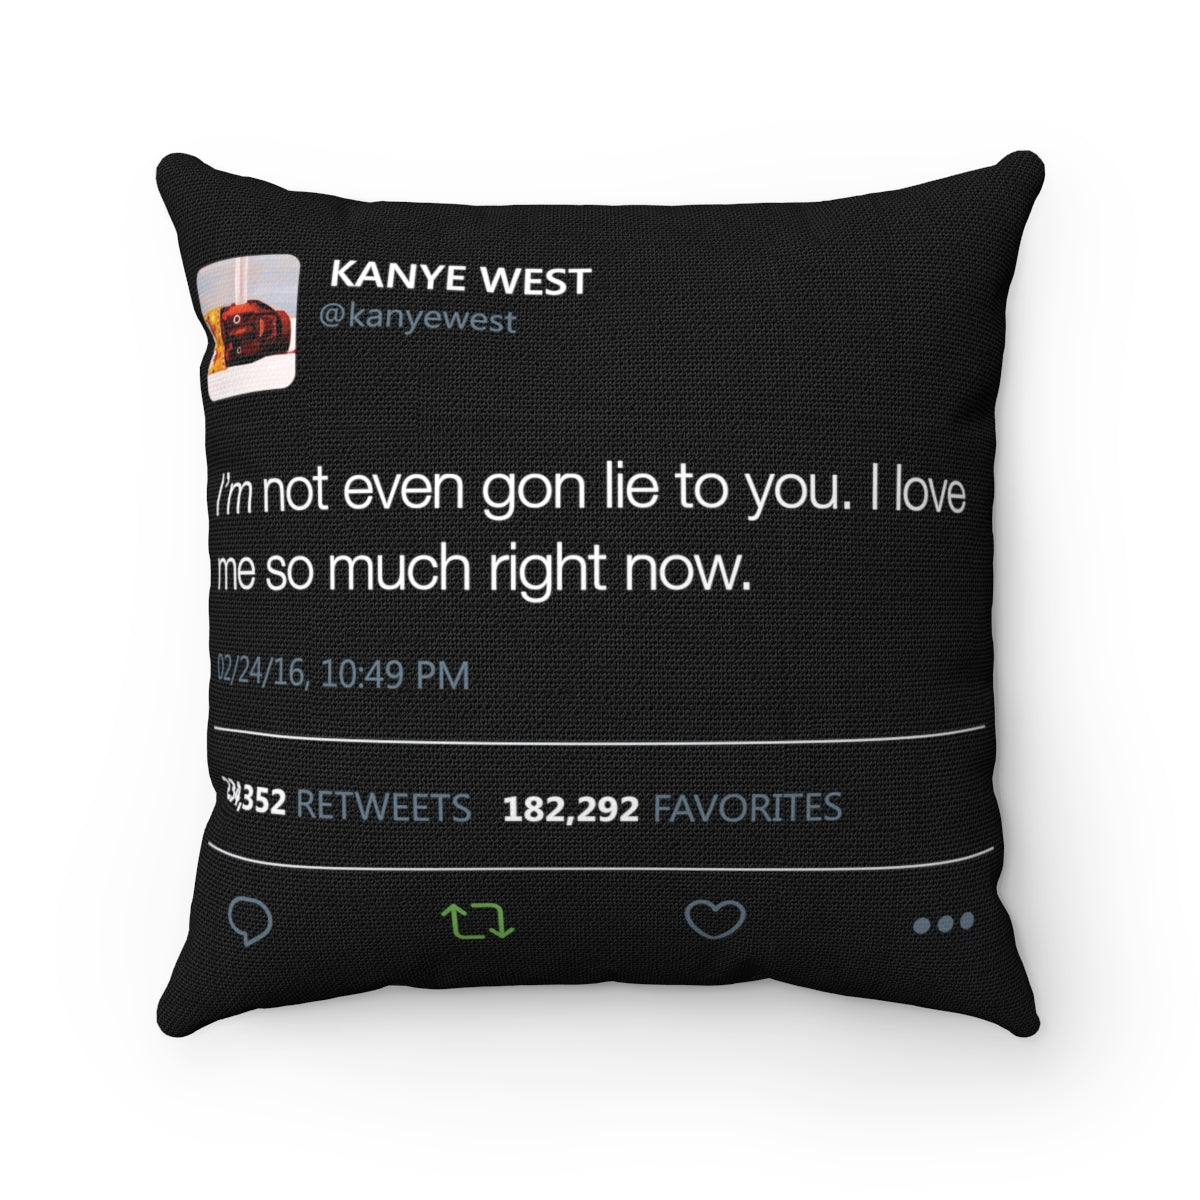 I love me so much right now Kanye West Tweet Spun Pillow-14" x 14"-Archethype